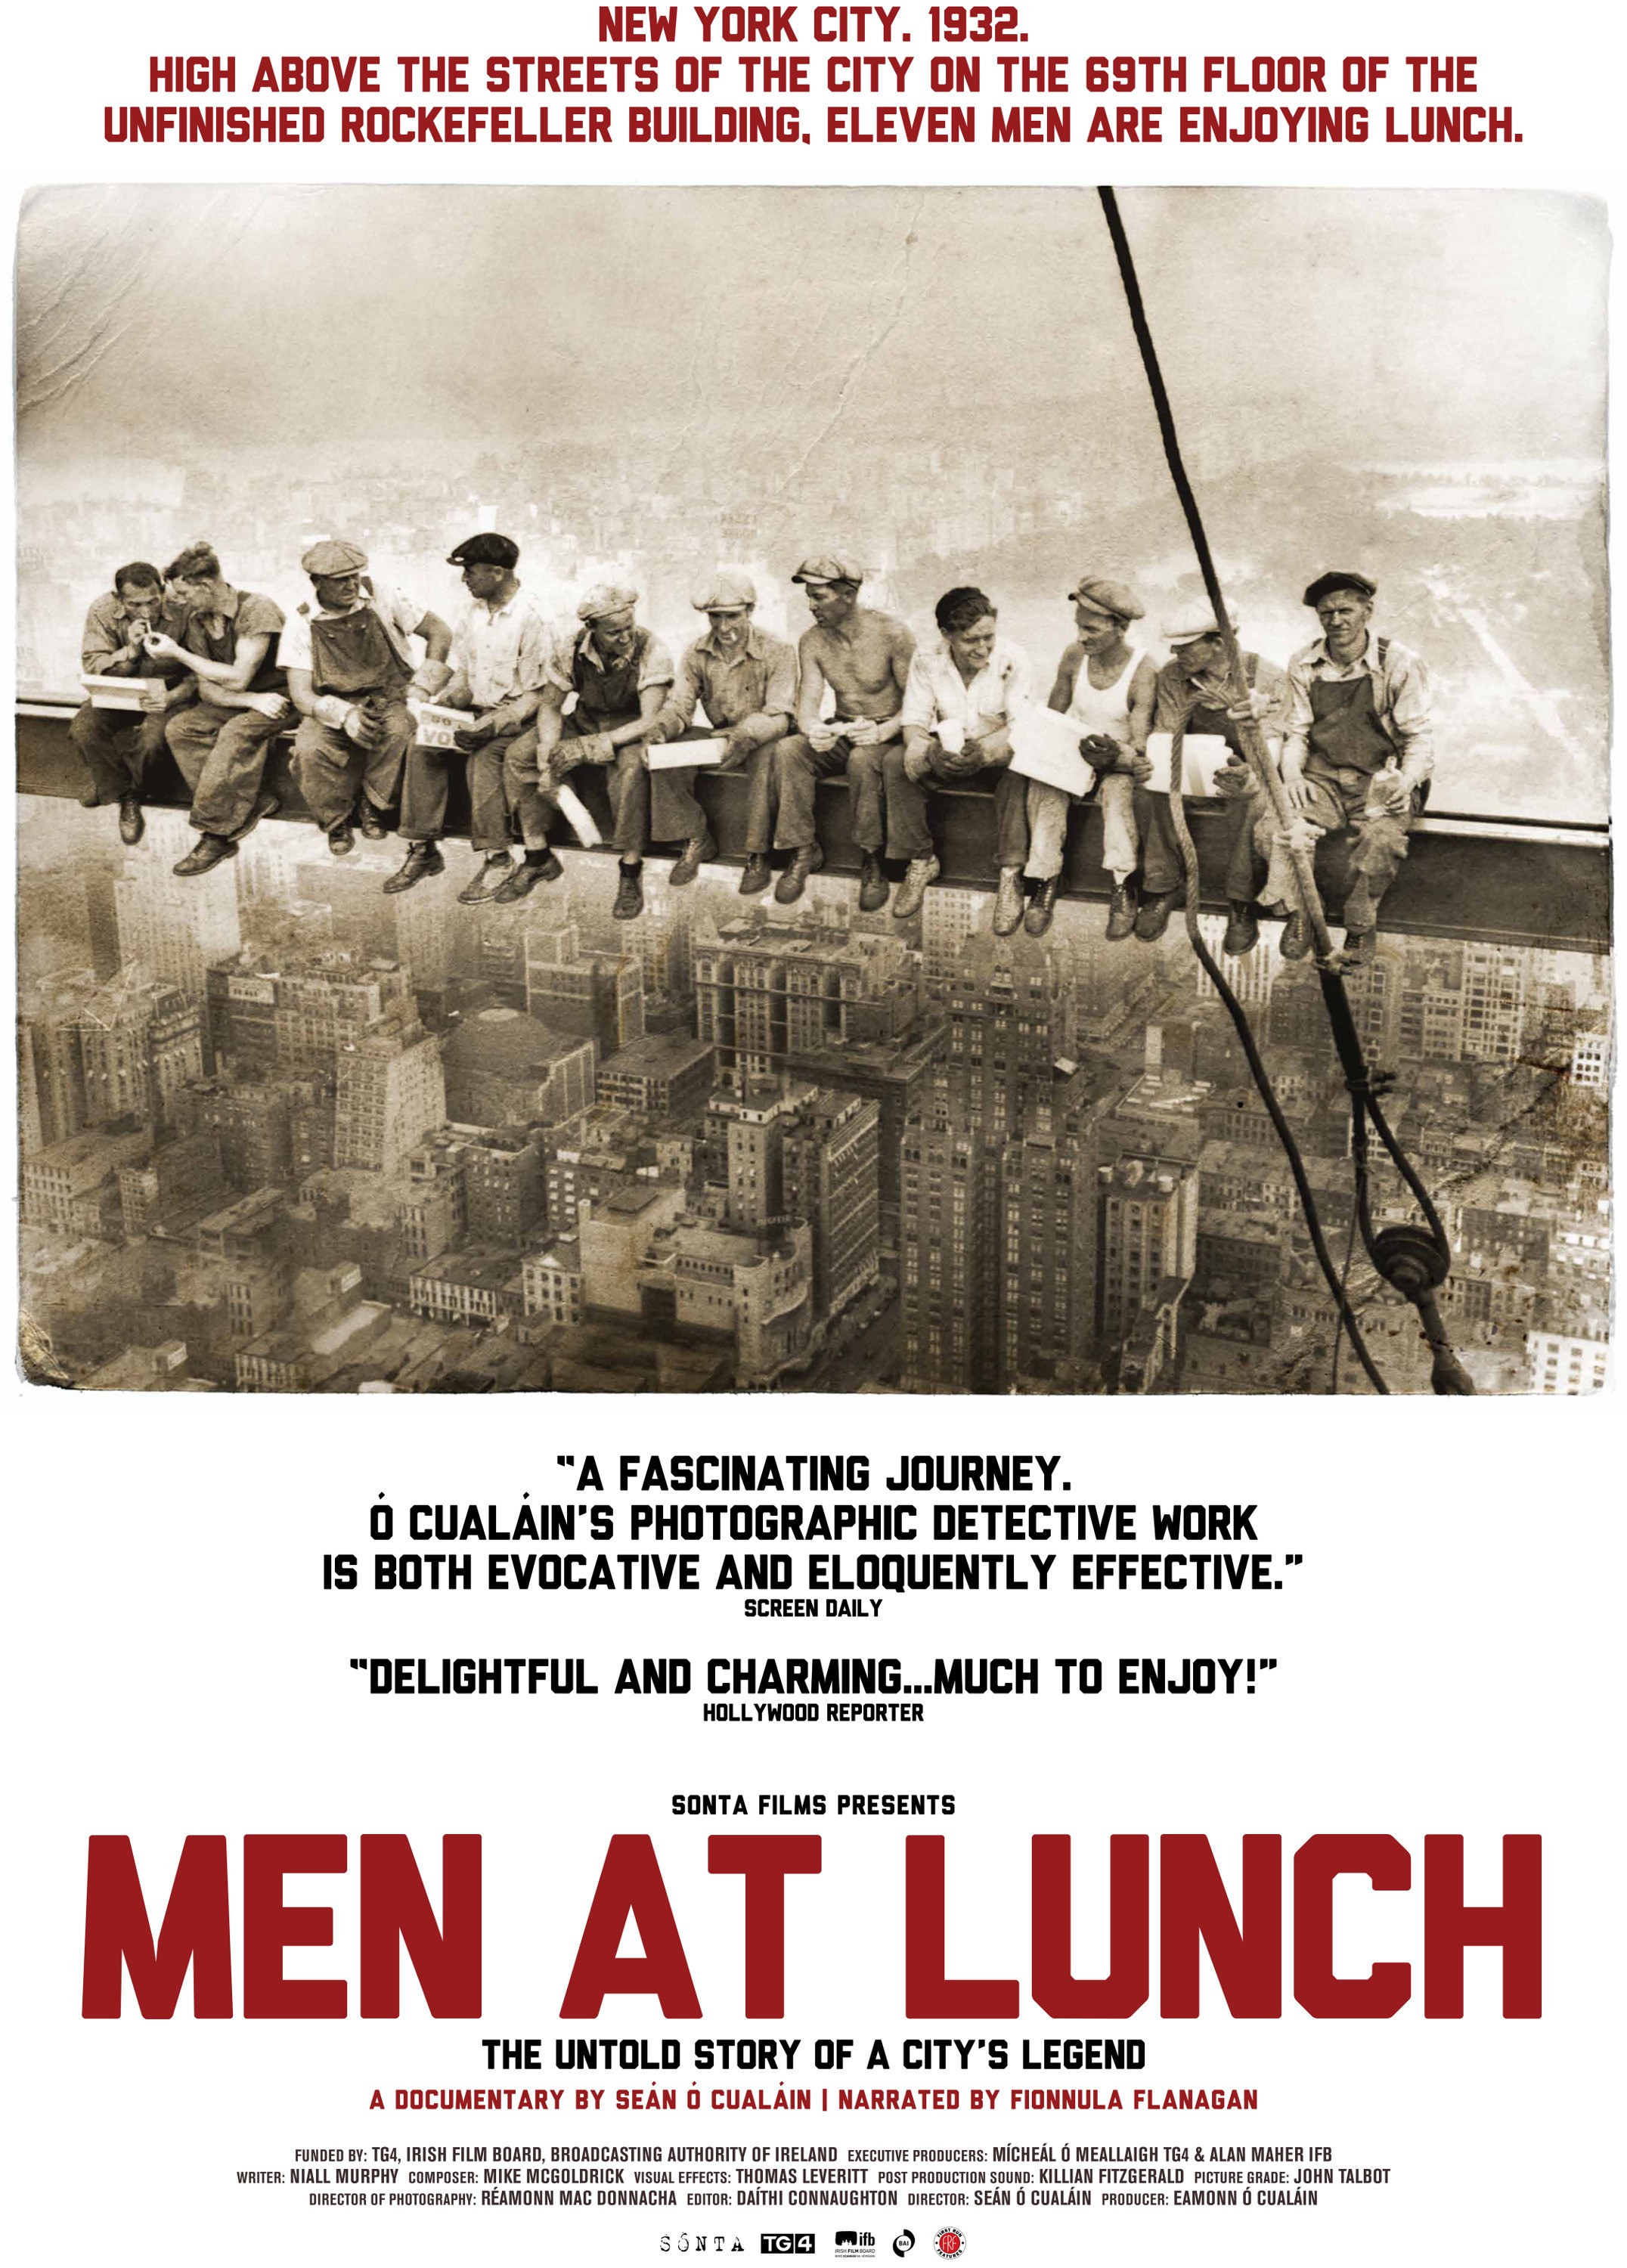 Mega Sized Movie Poster Image for Men at Lunch 